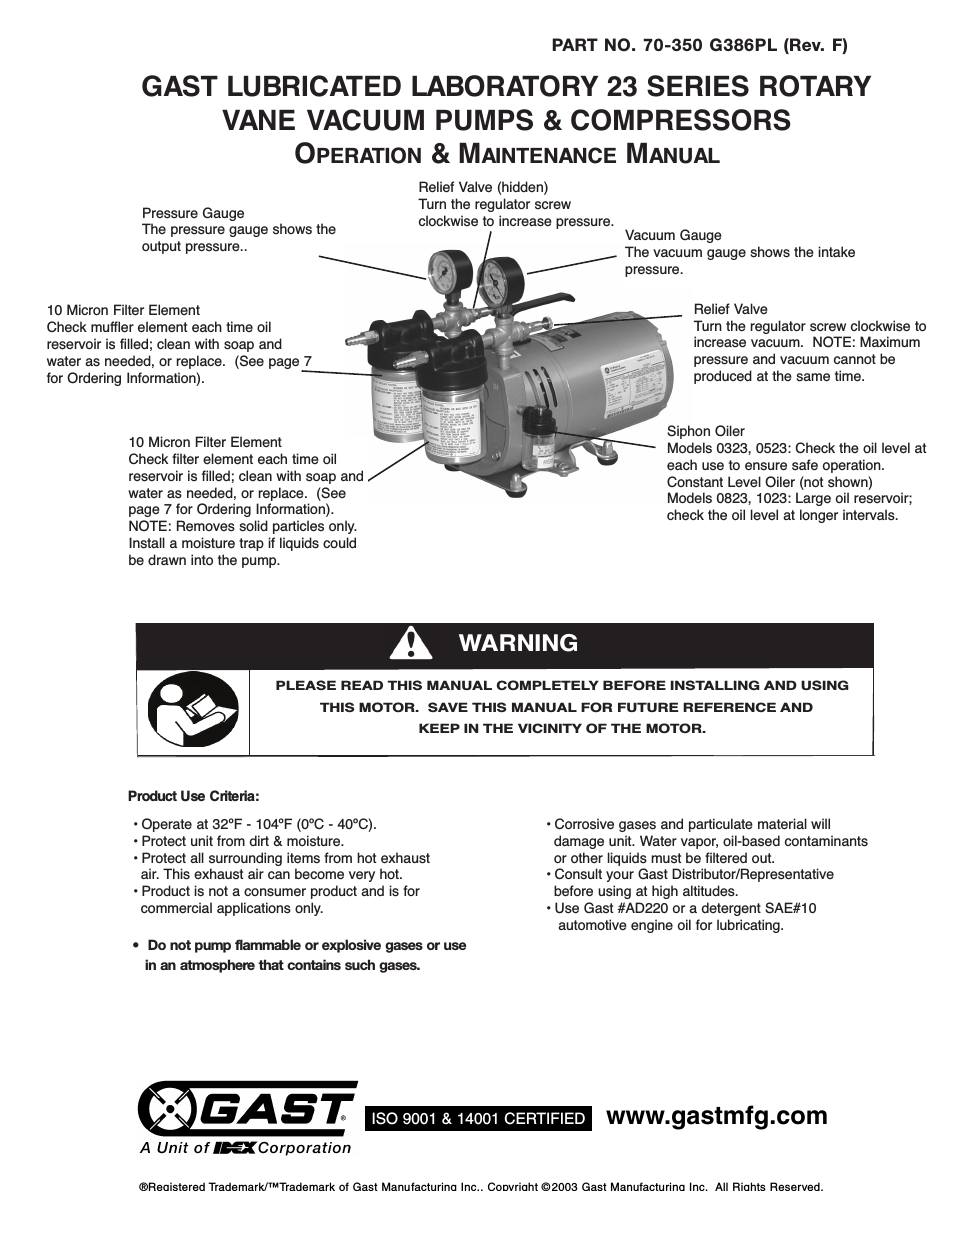 0323 Series Lubricated Laboratory Vacuum Pumps and Compressors